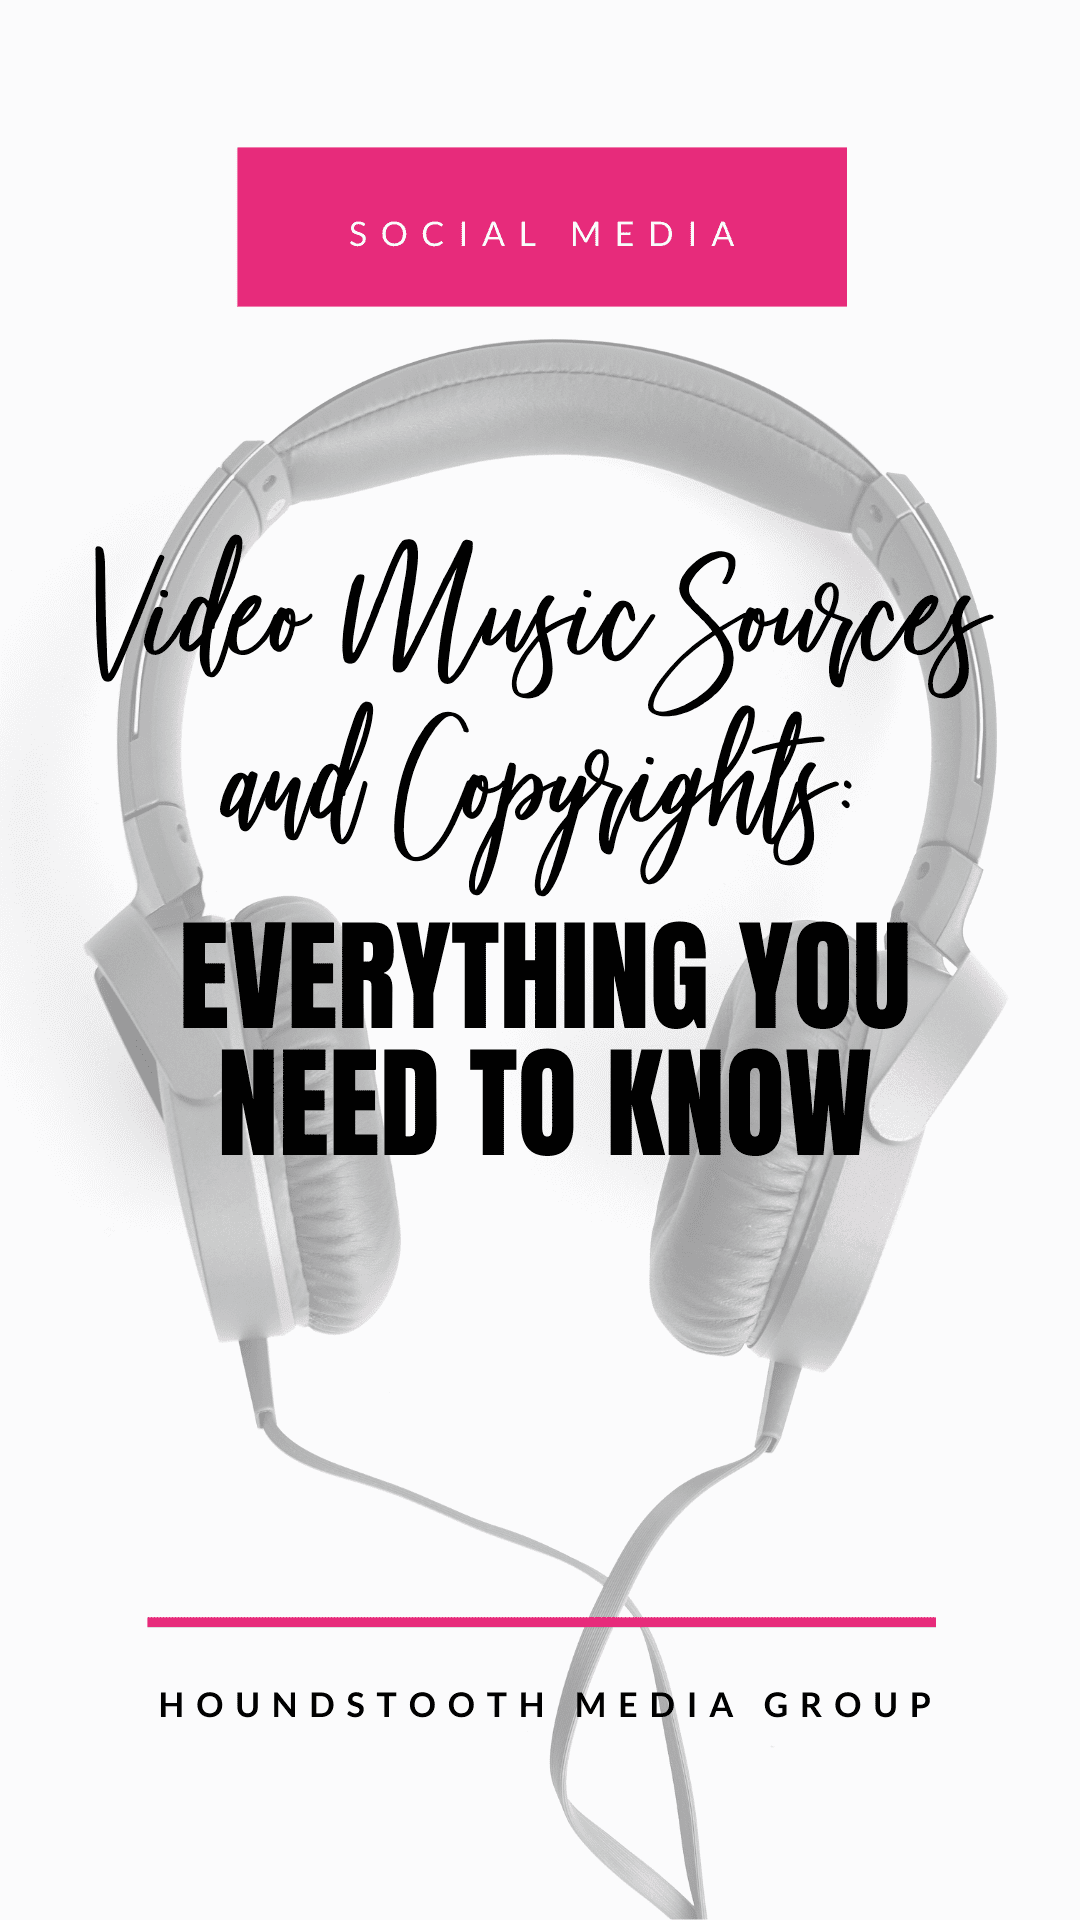 guide to video music sources for social media